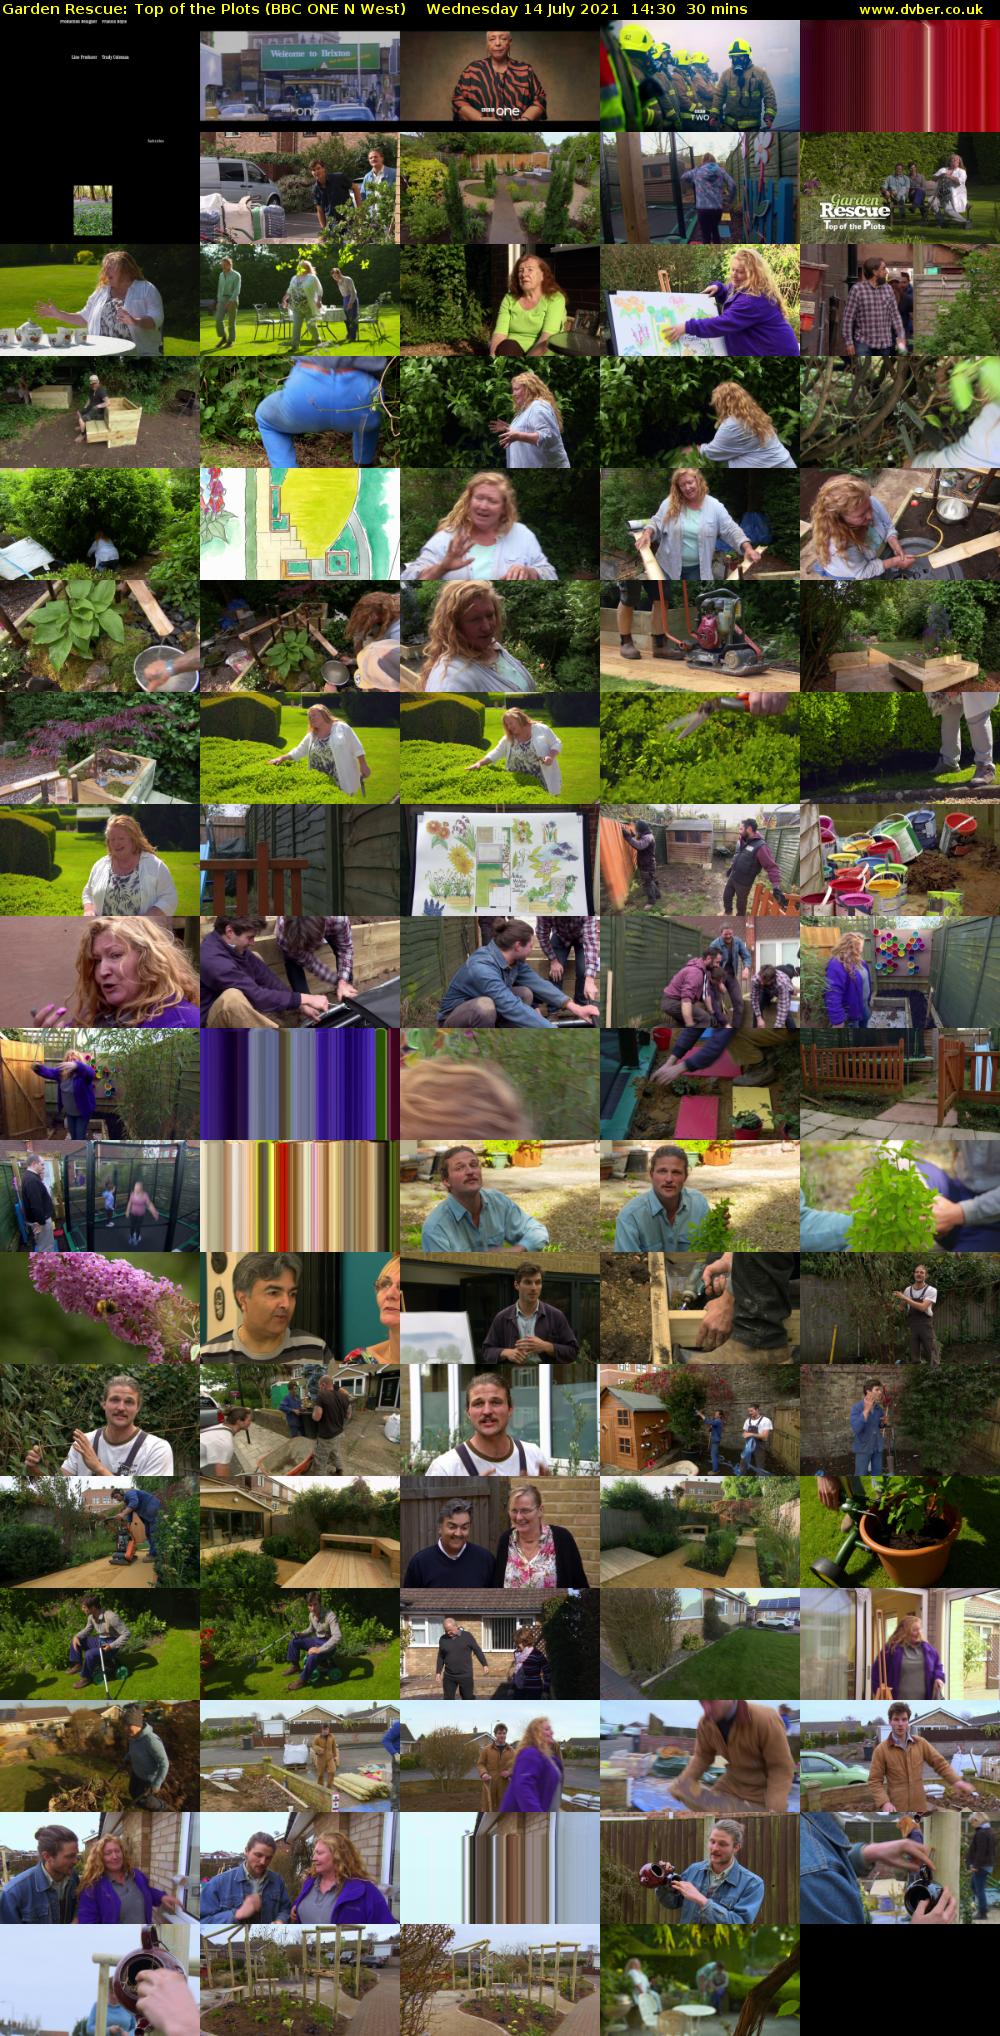 Garden Rescue: Top of the Plots (BBC ONE N West) Wednesday 14 July 2021 14:30 - 15:00